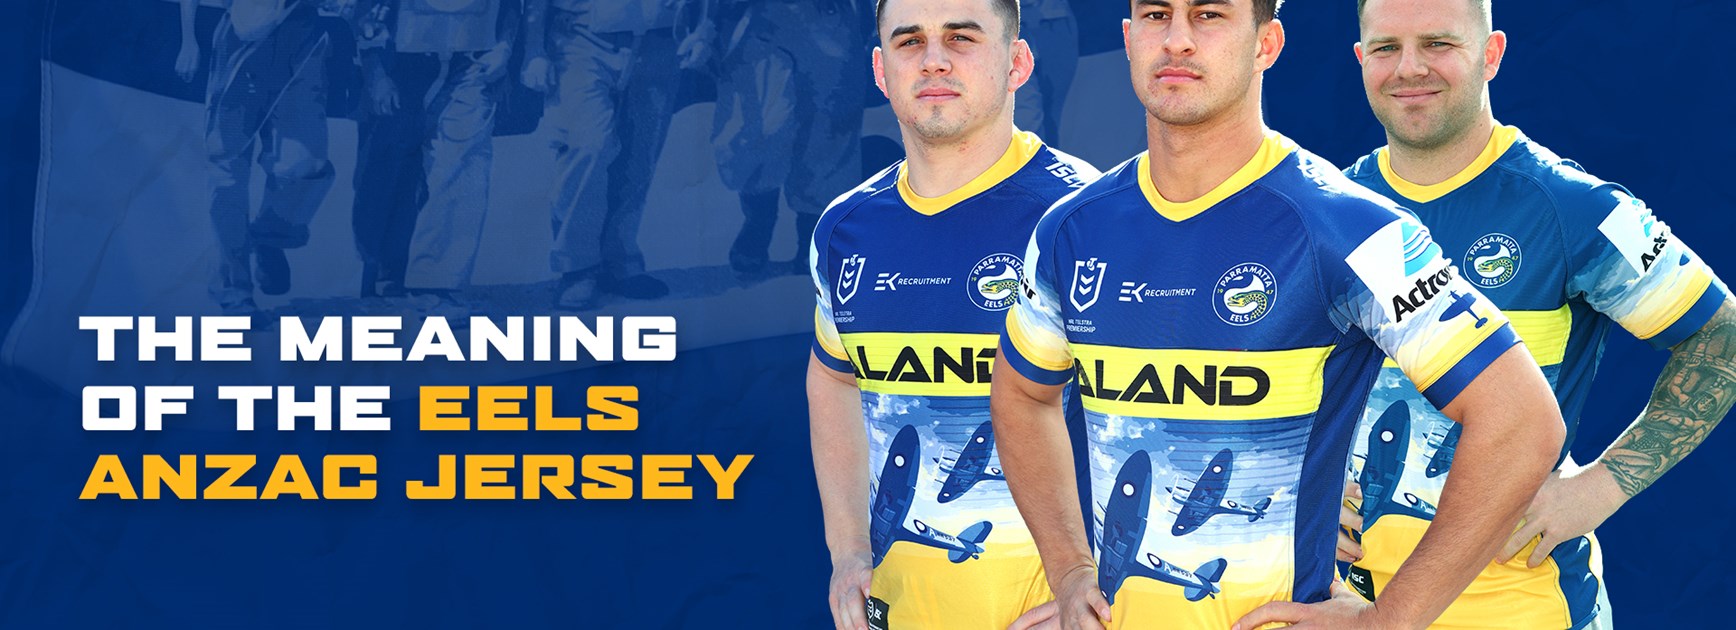 The meaning of the Eels' Anzac jersey